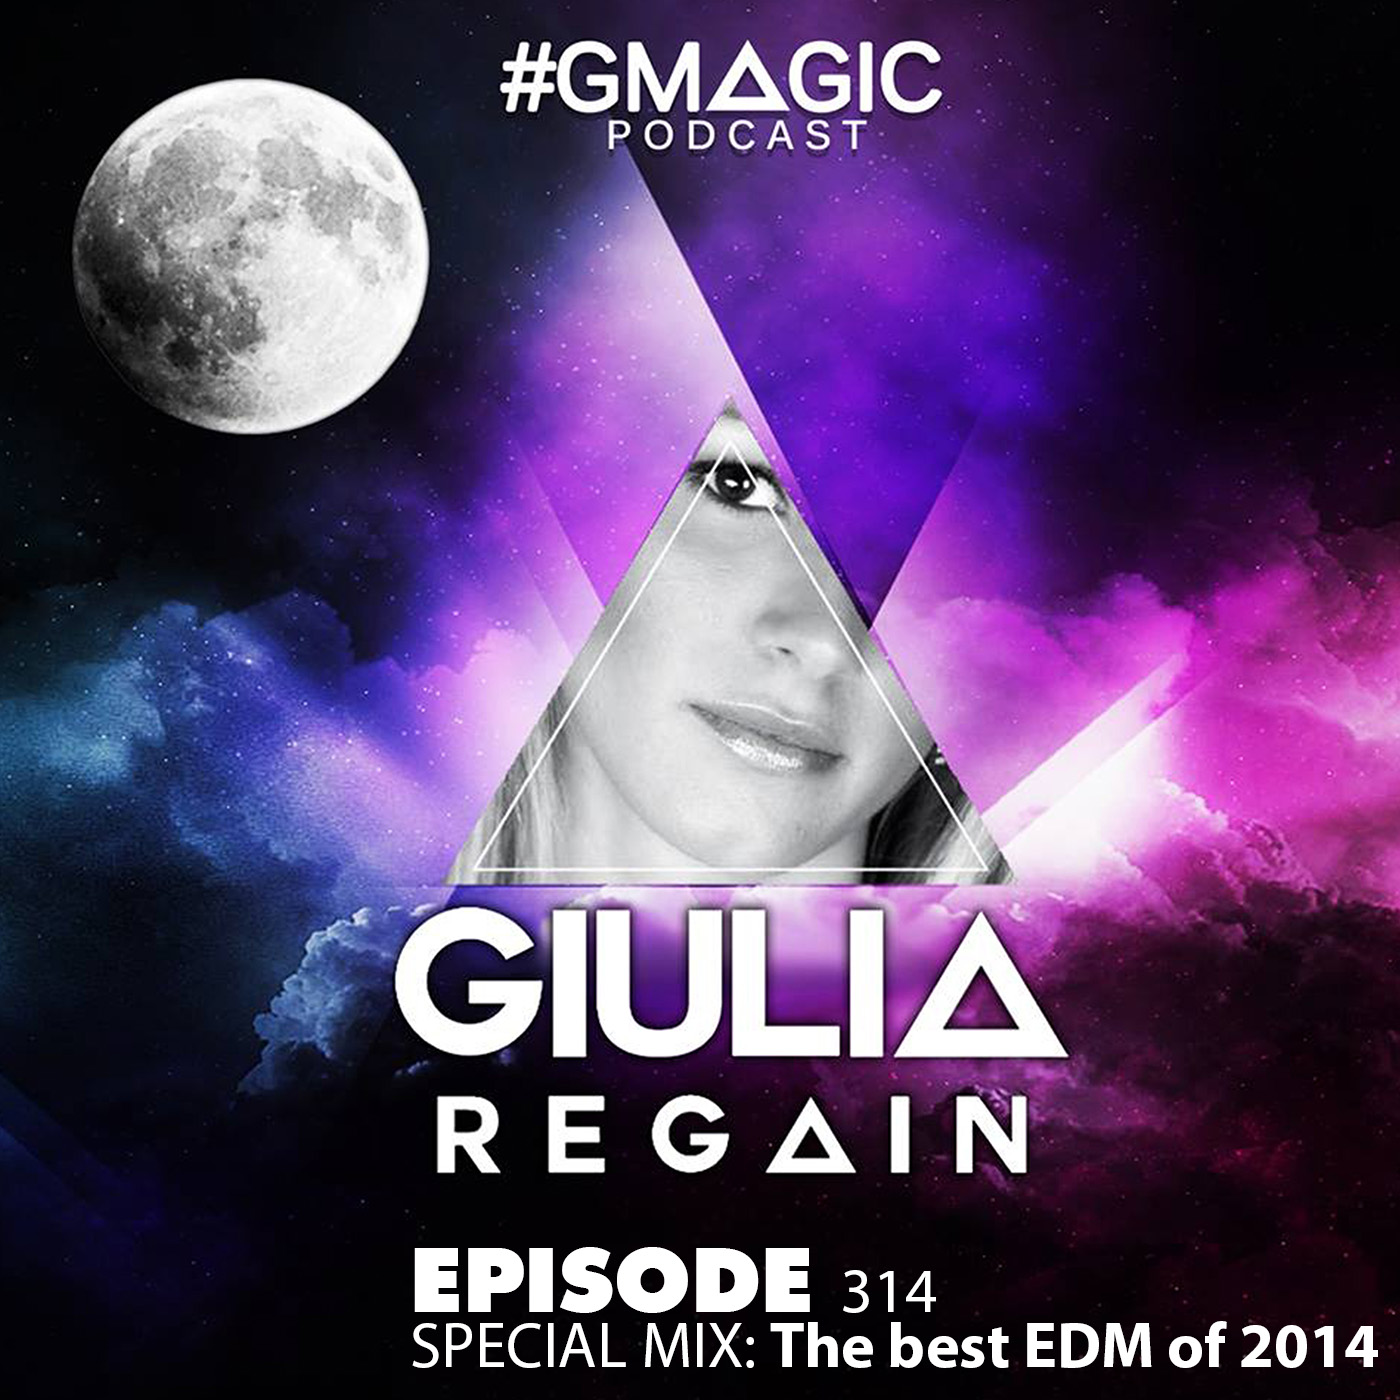 #Gmagic Podcast 314 - Special Mix: The best EDM of 2014